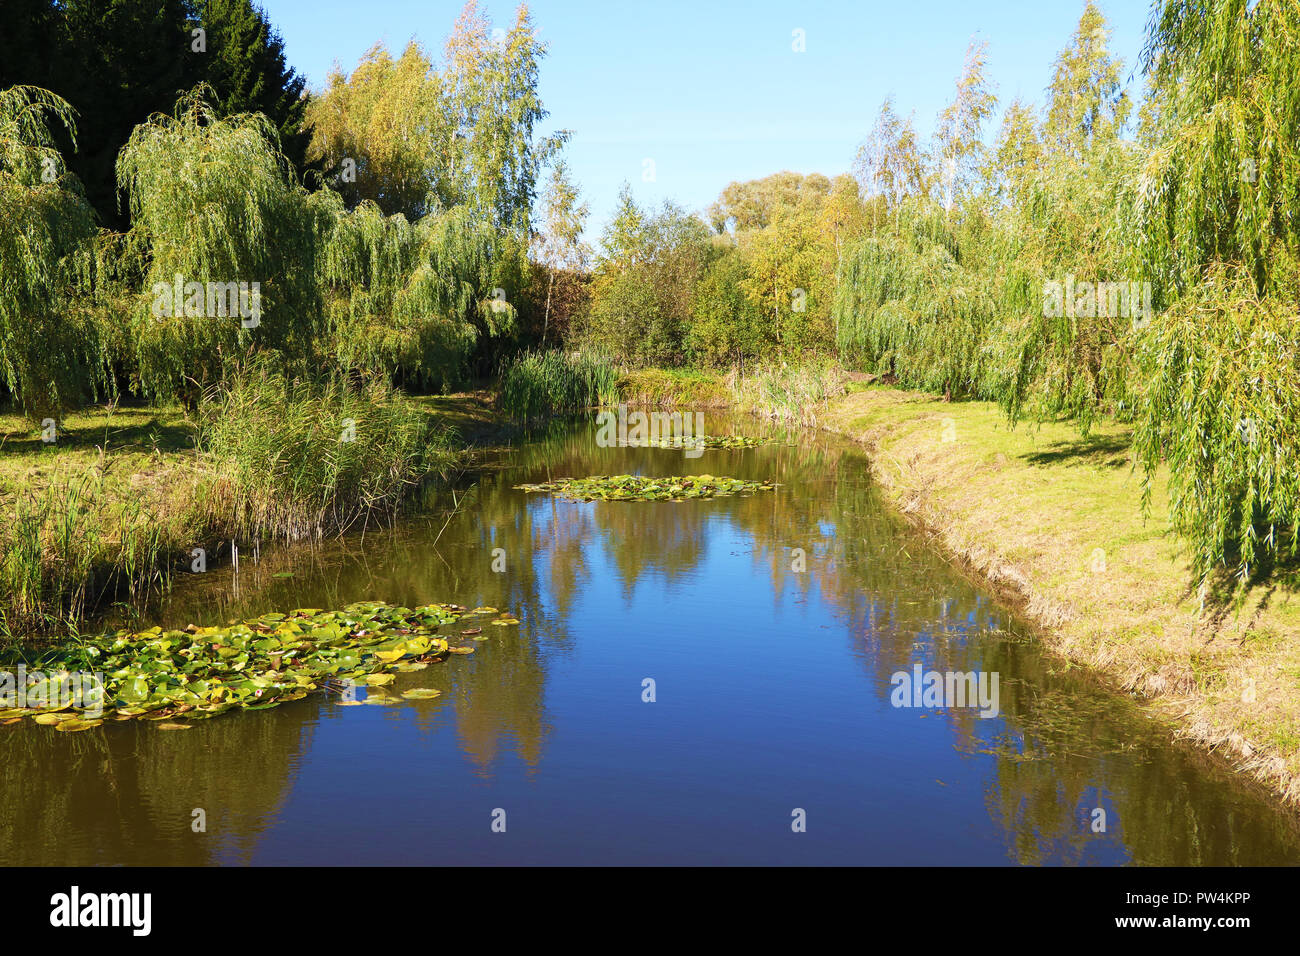 Pond surrounded by trees with a reflection in the water on a sunny day, background. Stock Photo